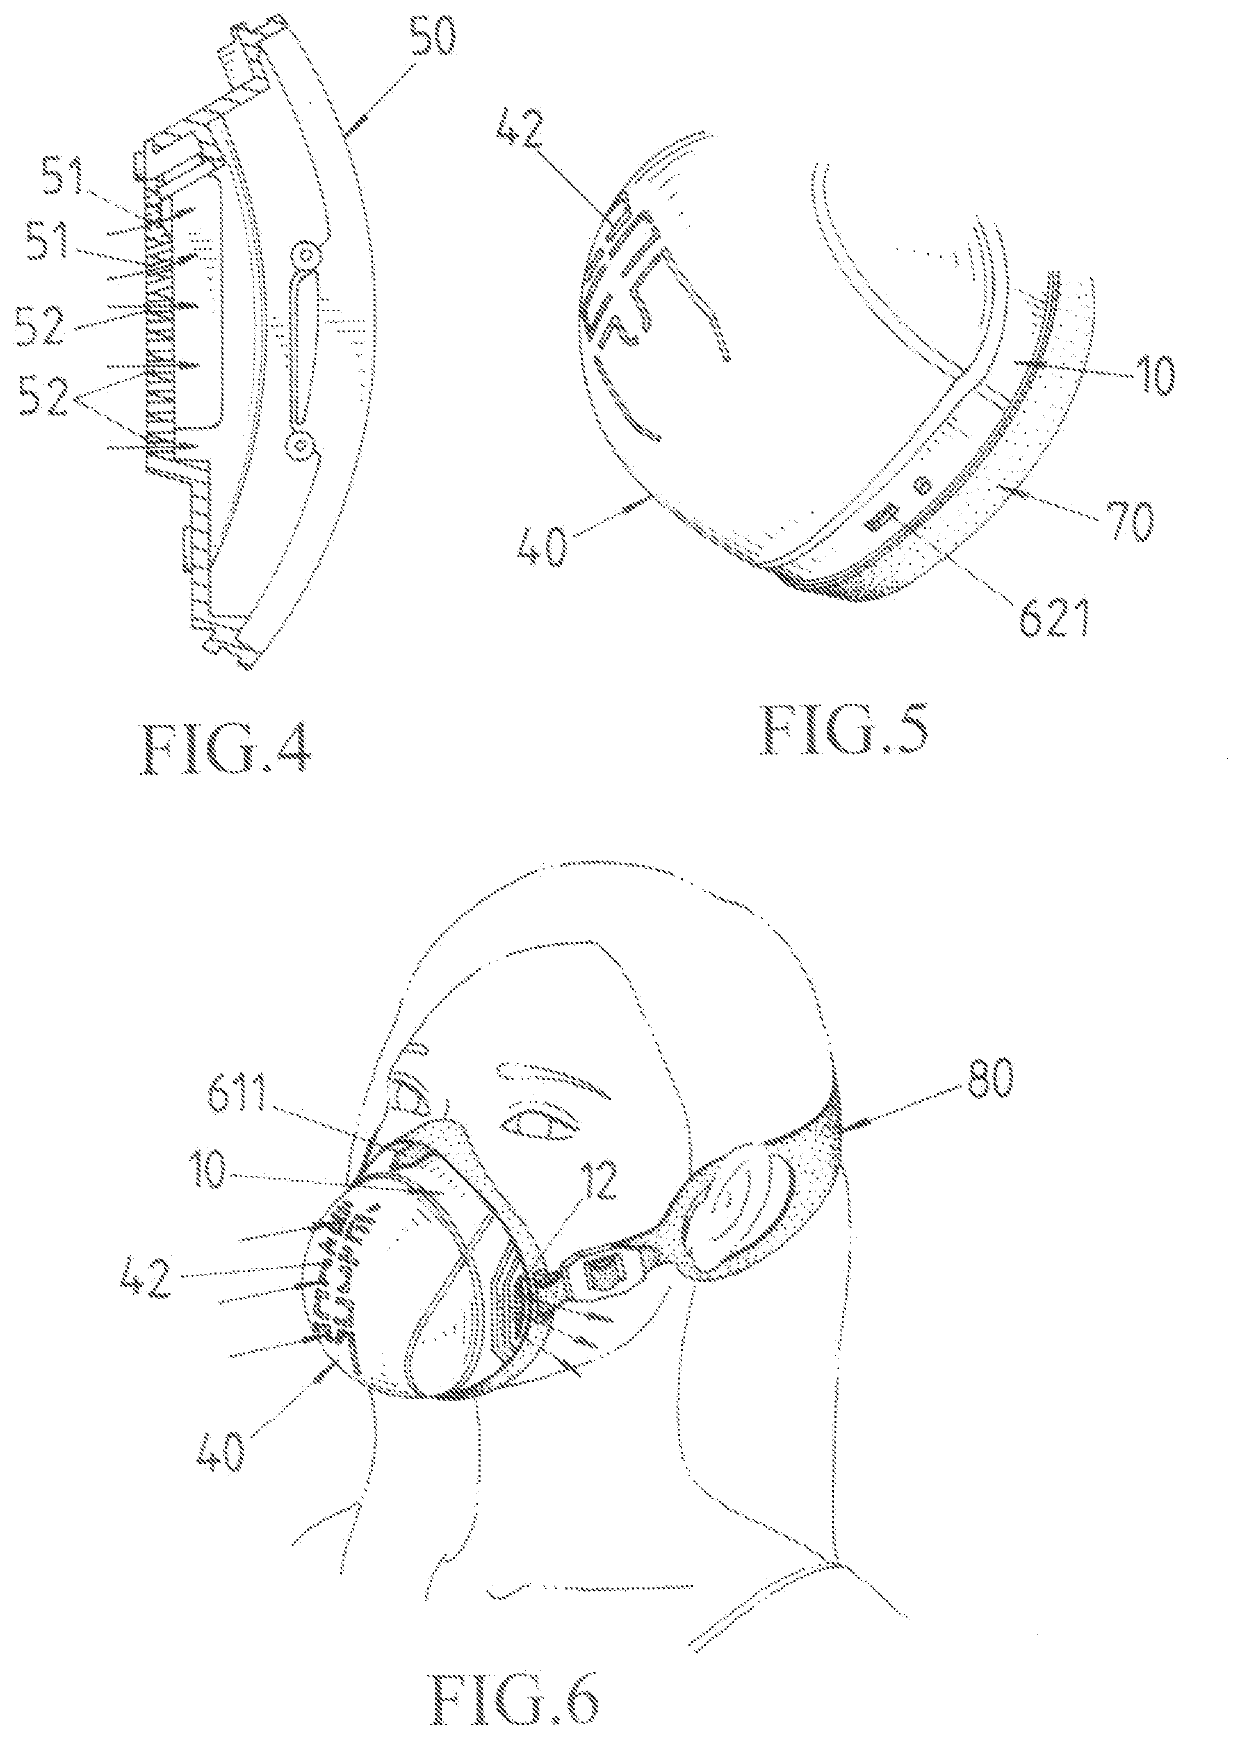 Air purification face mask structure